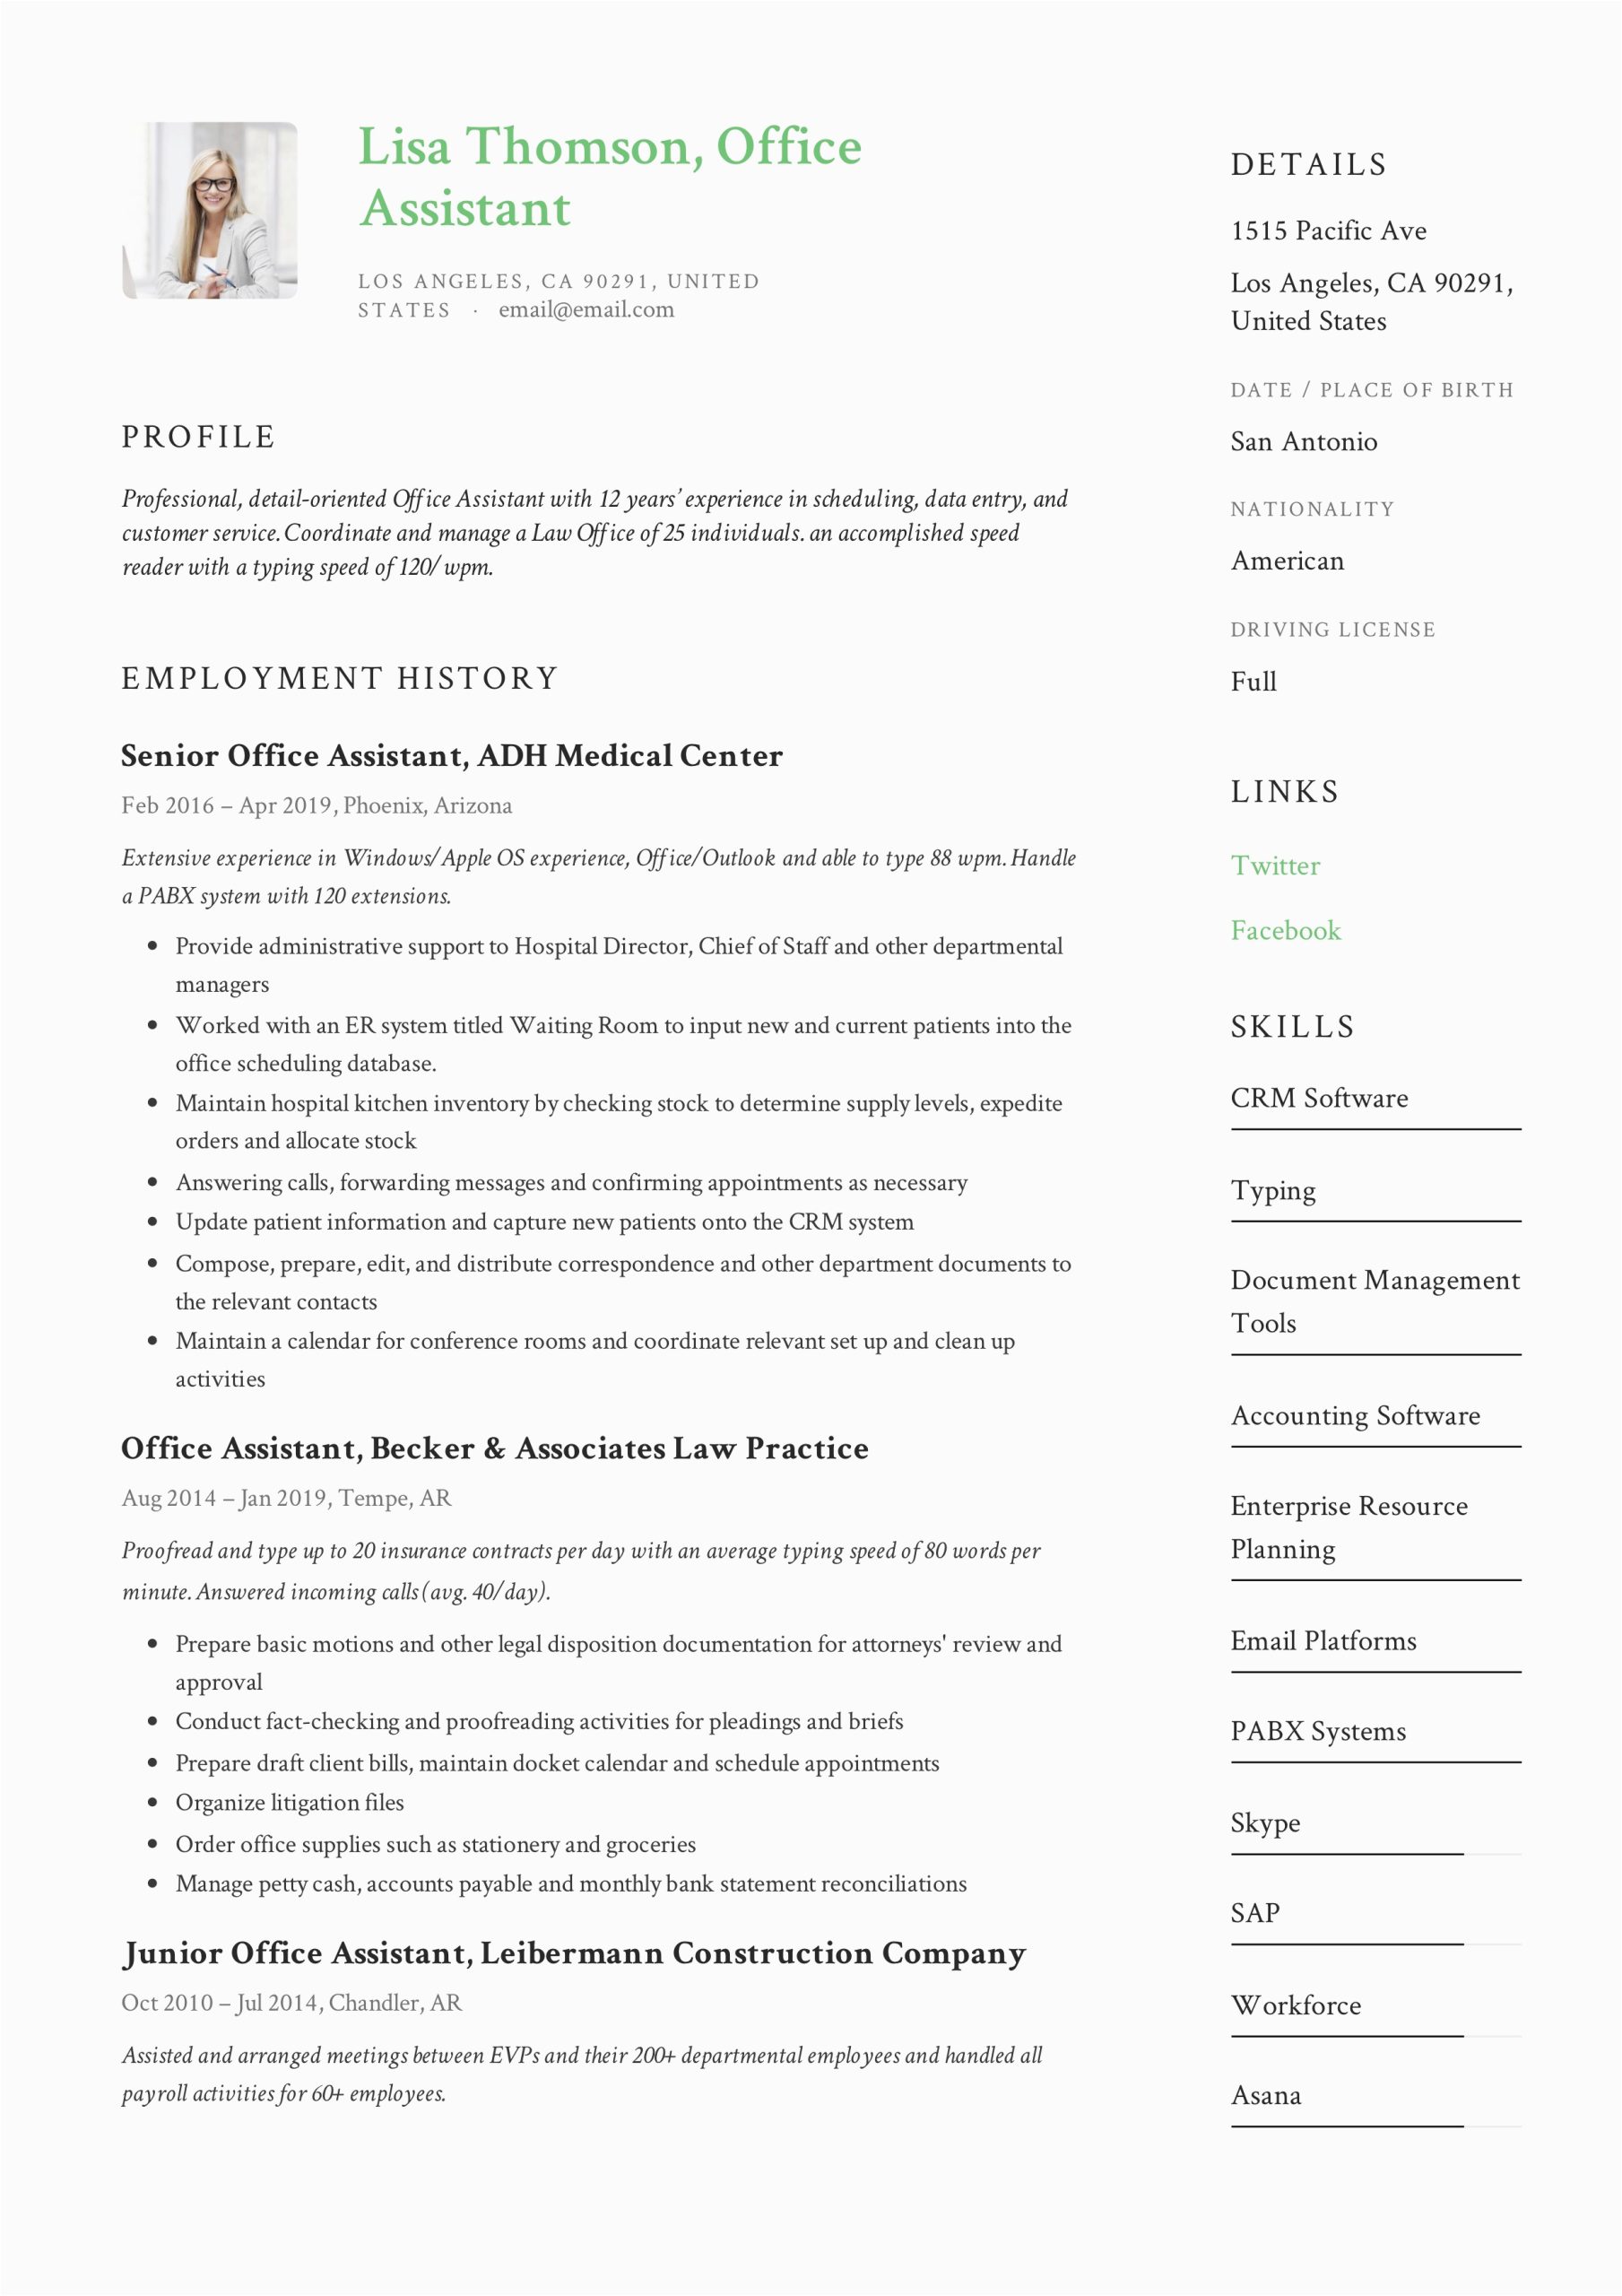 Resume Samples for Office assistant Job Fice assistant Resume Writing Guide 12 Resume Templates